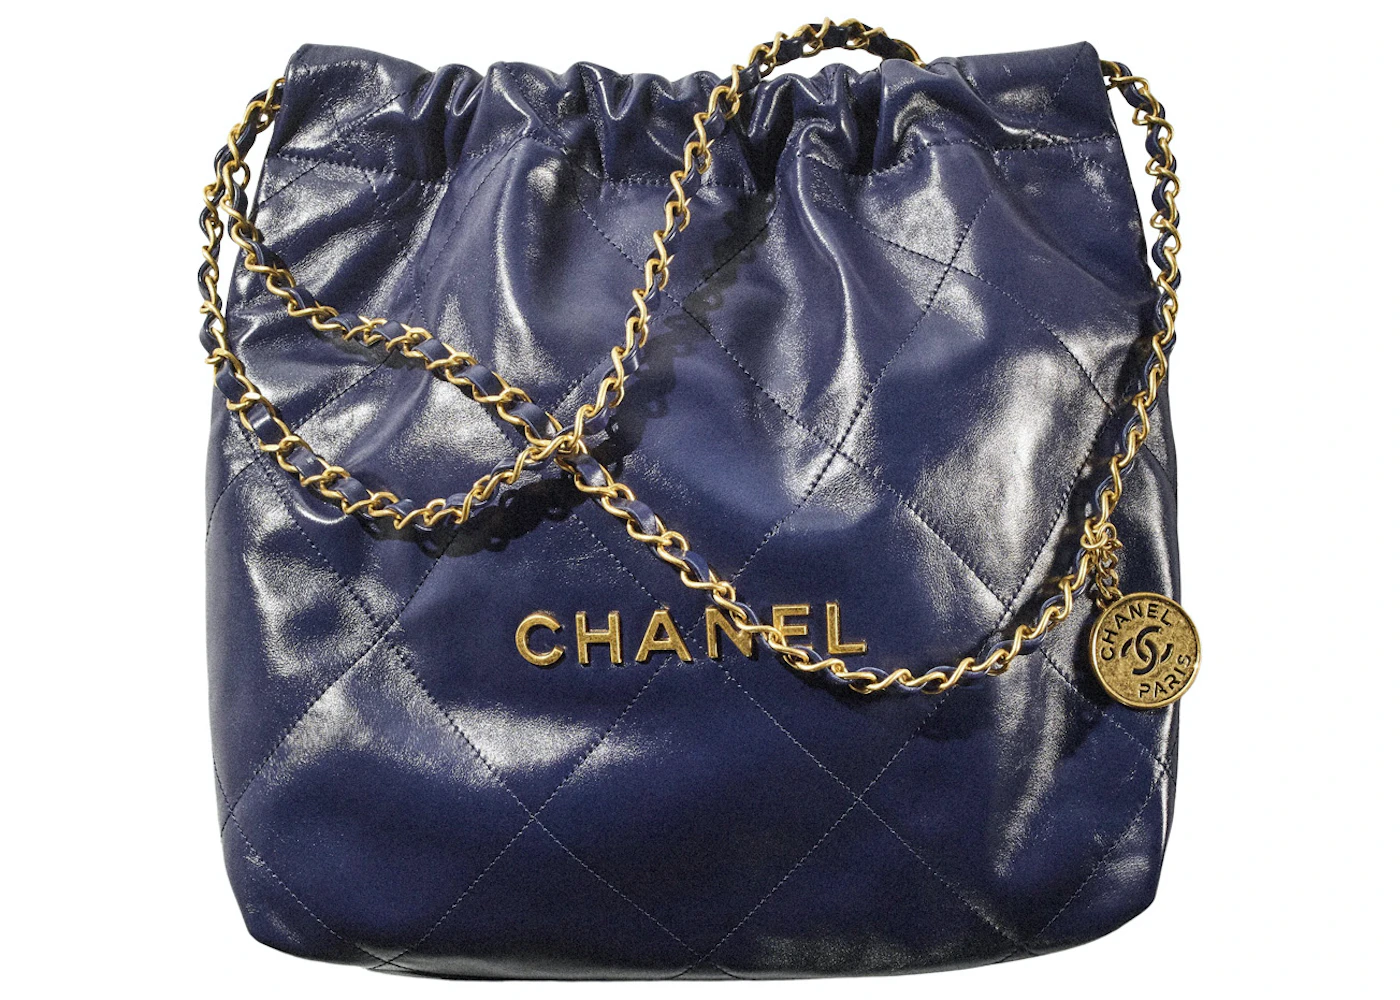 Chanel 22 Handbag Small 22S Calfskin Navy in Calfskin Leather with